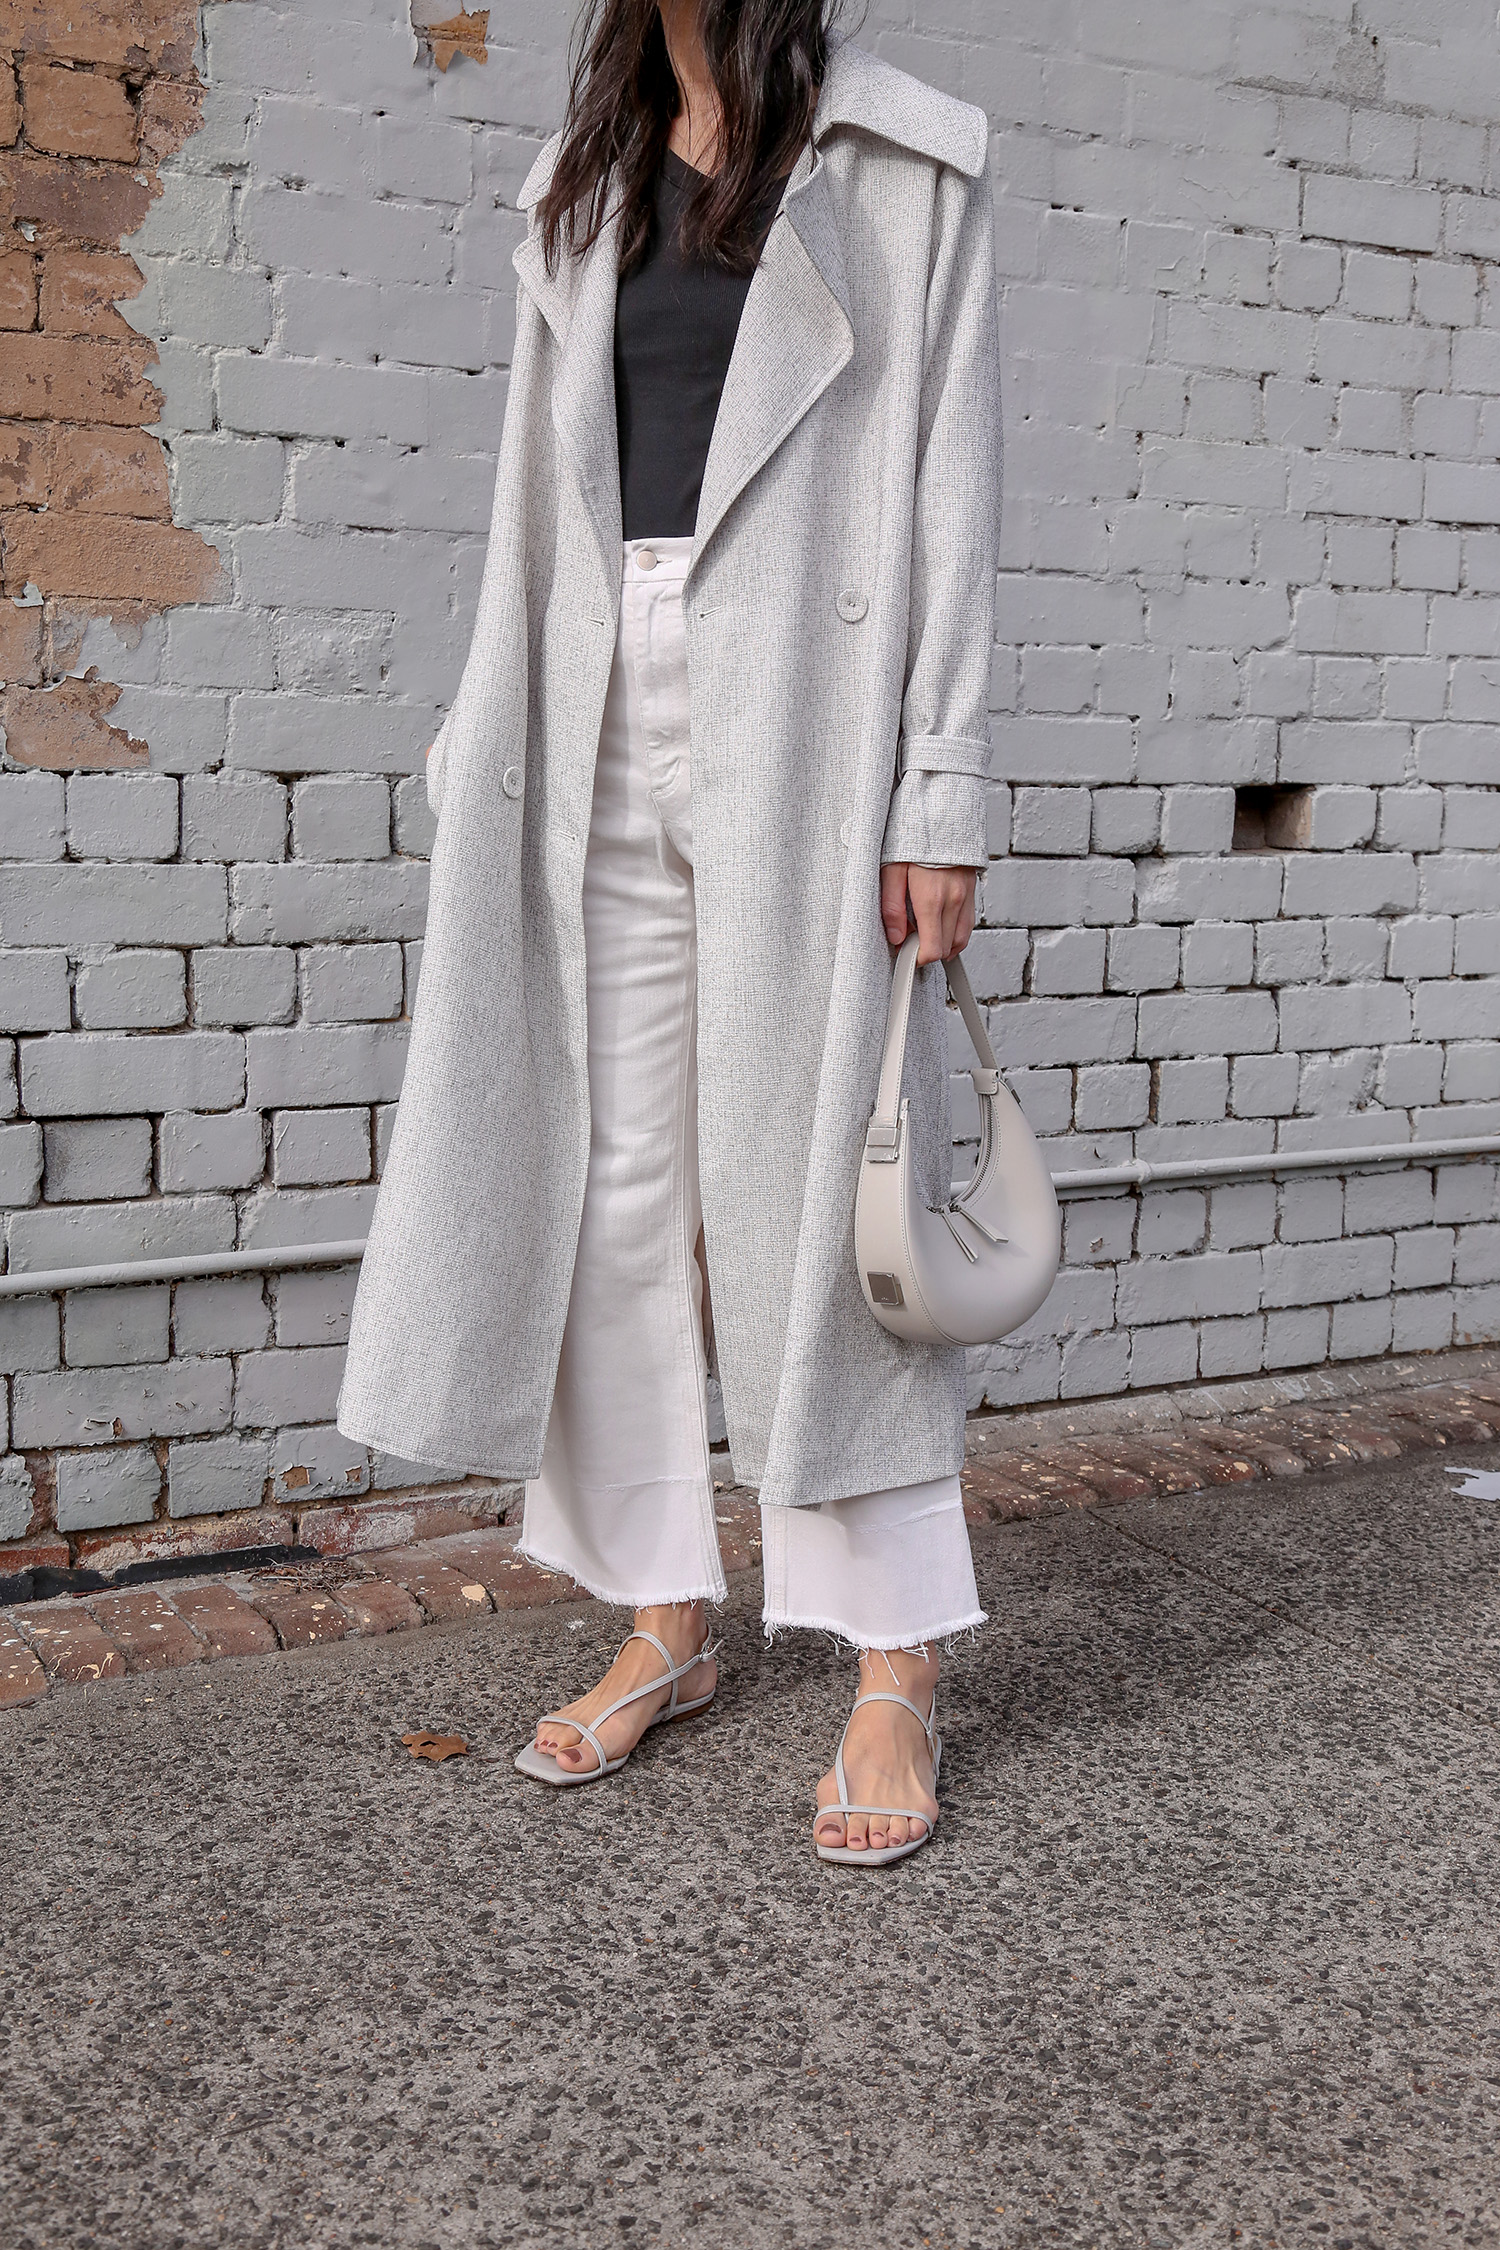 Wearing Staple the Label trench coat with Rachel Comey legion jeans and Aeyde Ella sandals